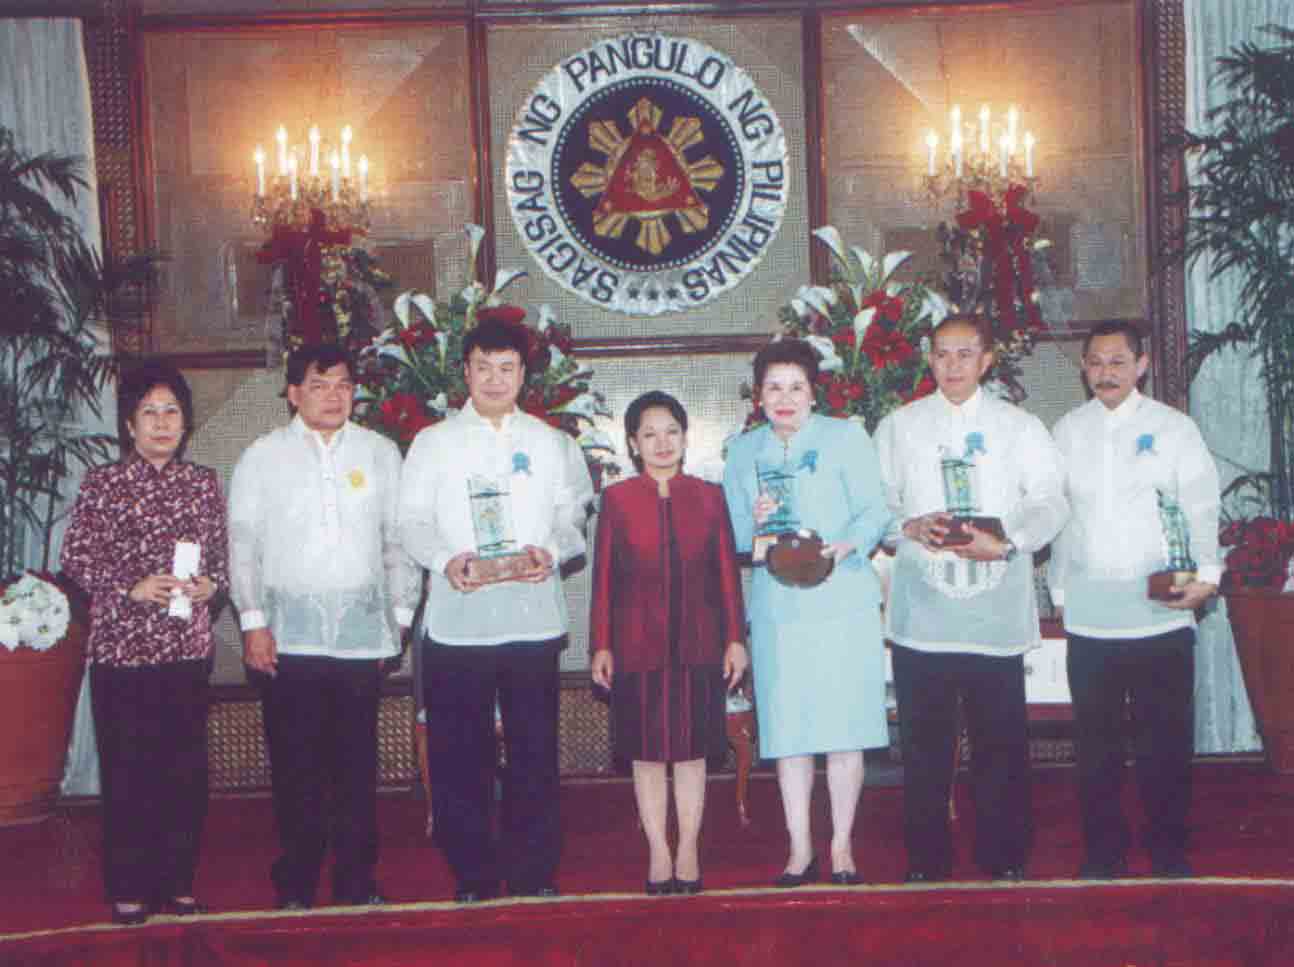 The 2001 Most Child-Friendly Phillippine LGUs with Her Excellency President Gloria Macapagal-Arroyo